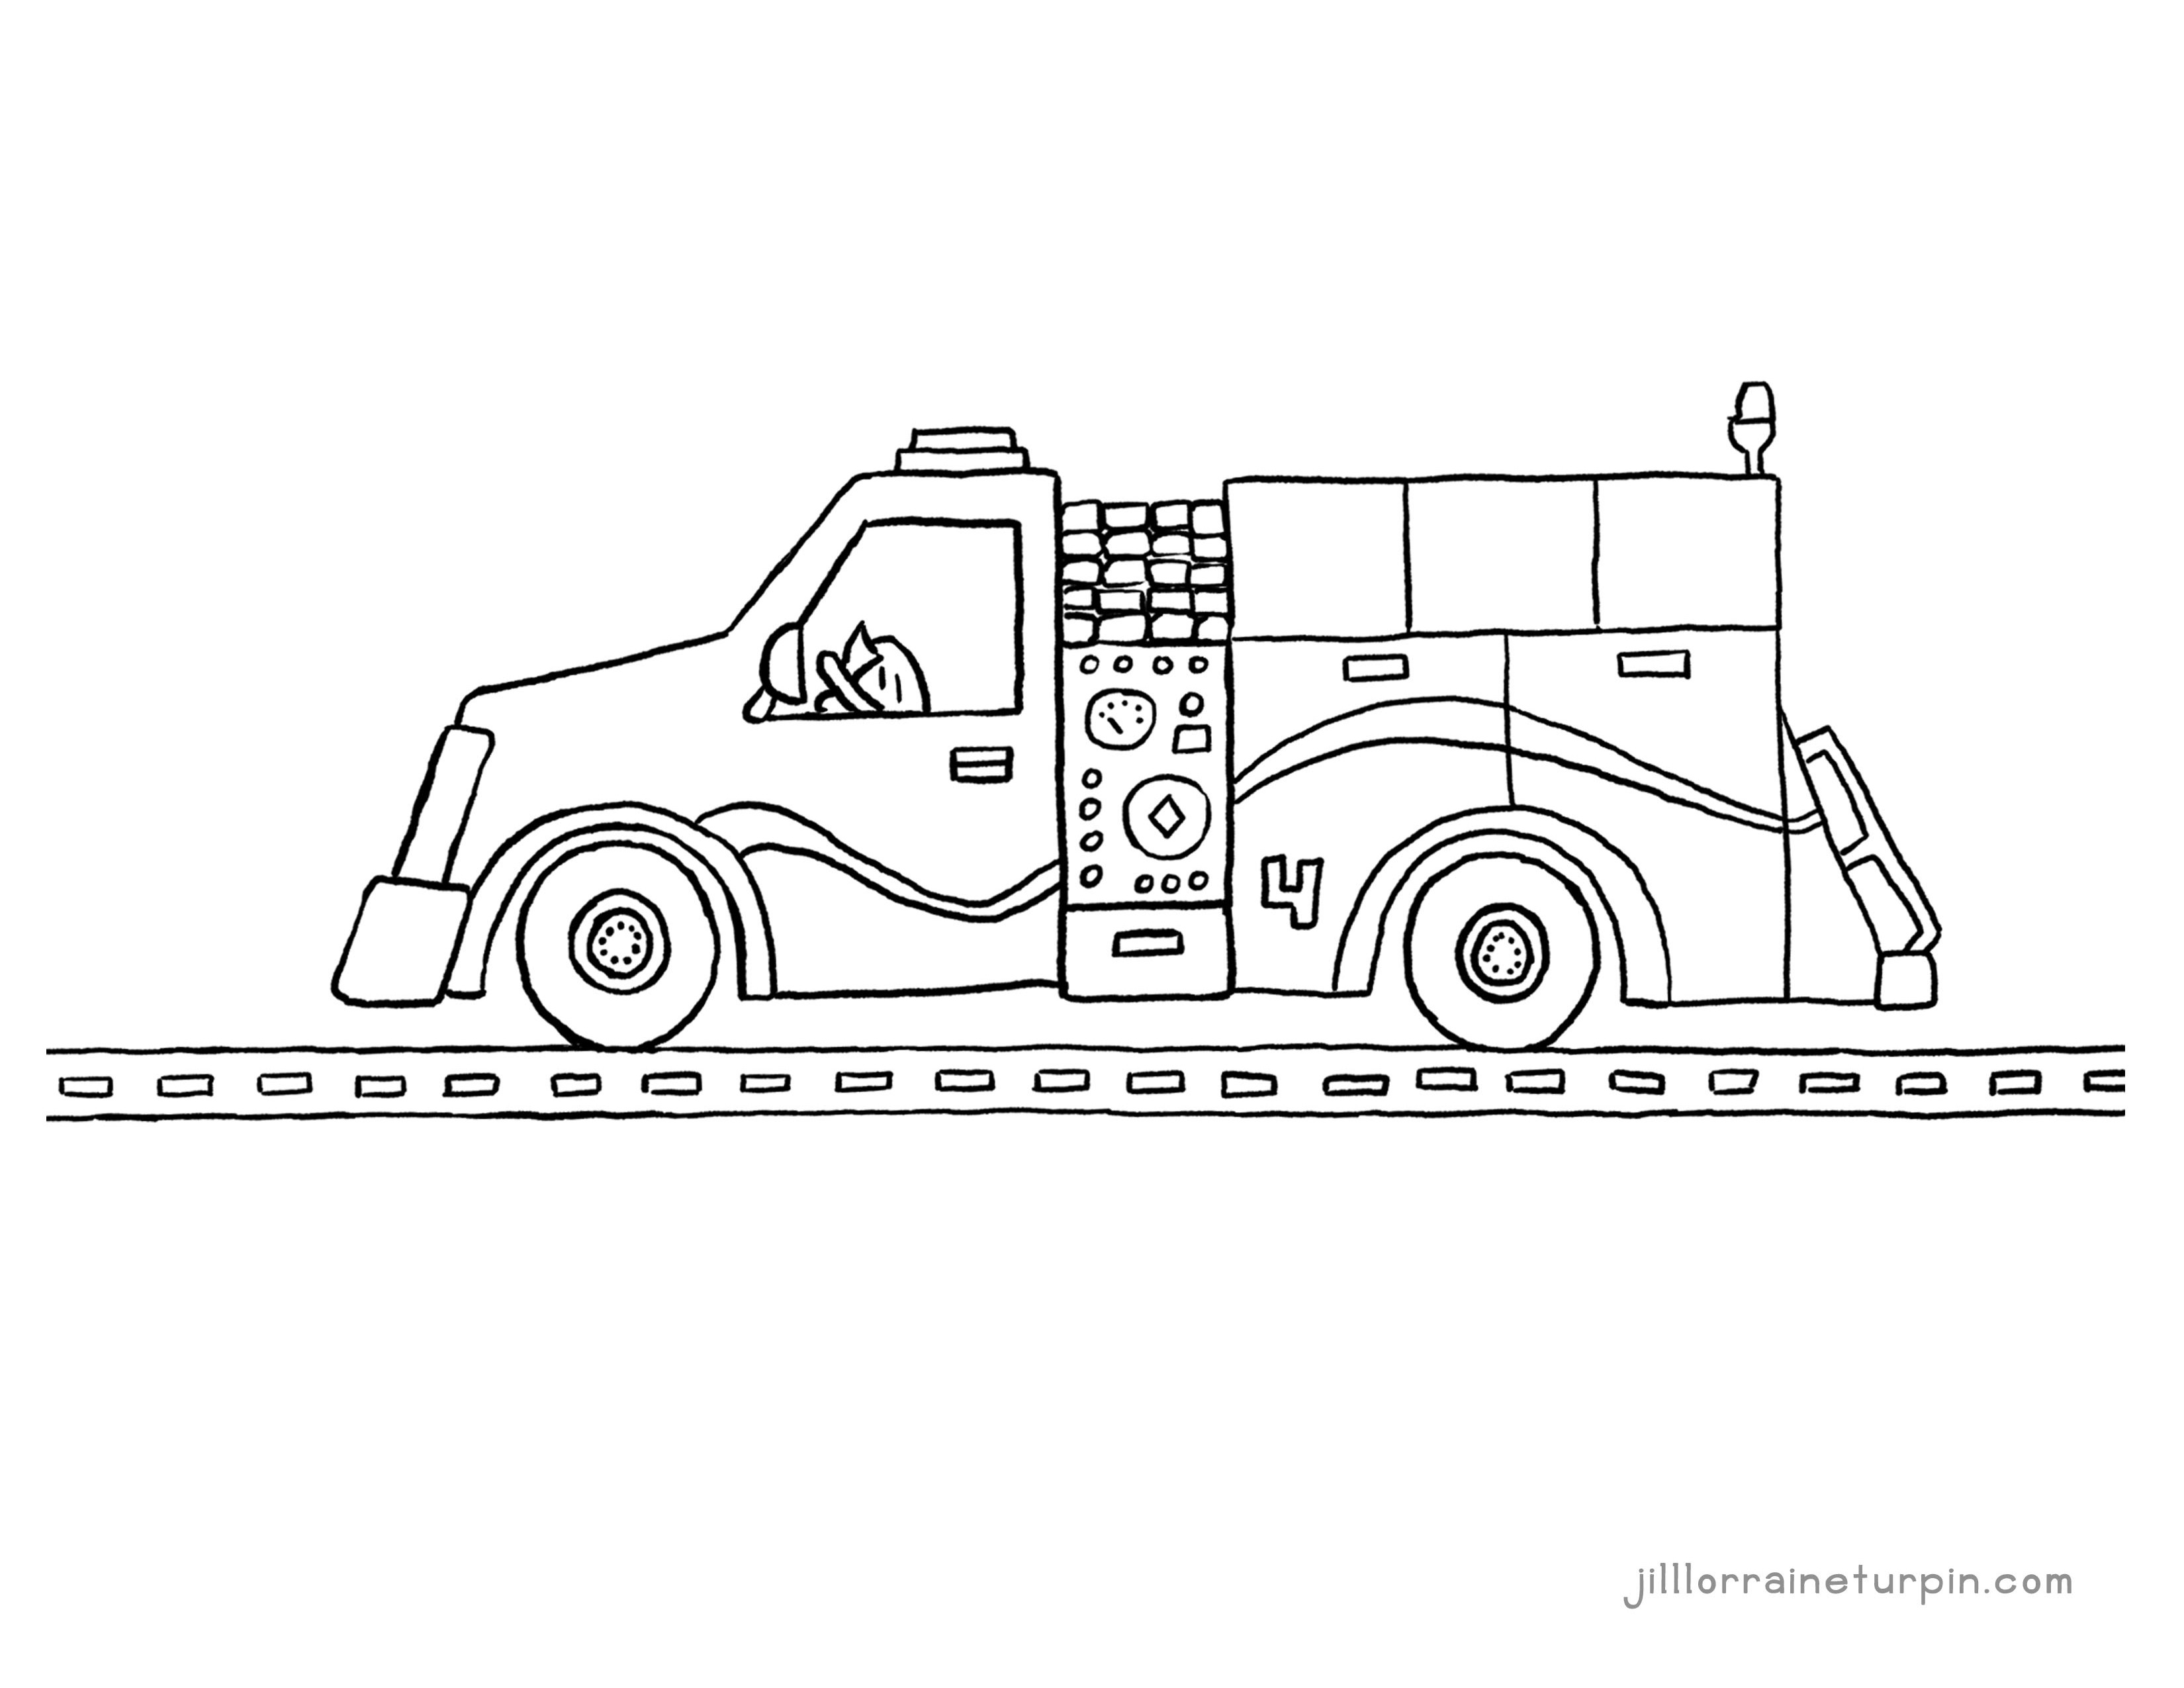 Free Printable Fire Truck Coloring Pages - My Very Own ...